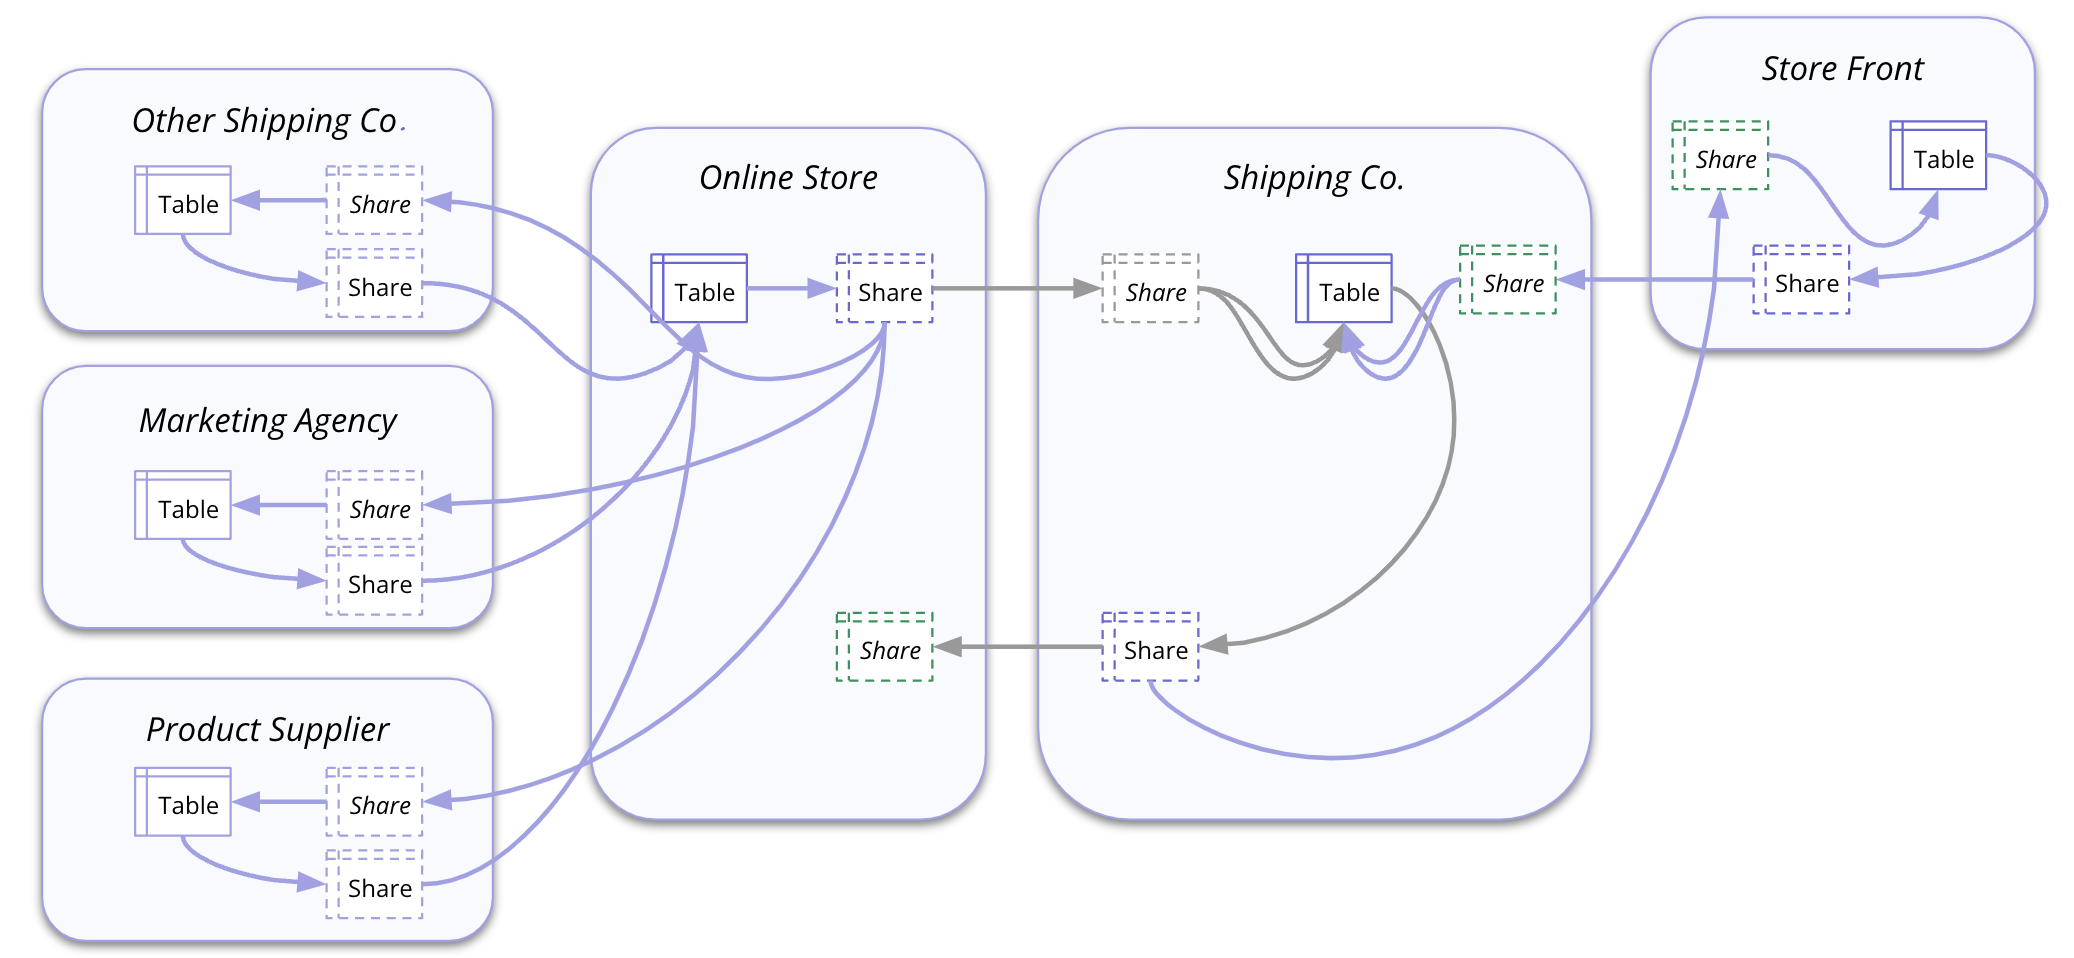 Diagram: A six-party data ecosystem (online store, shipping co. 1, shipping co. 2, storefront, marketing agency, and product supplier) and the inefficient and uncollaborative workflows that prompt costly manual reconciliation tasks, risks, and errors